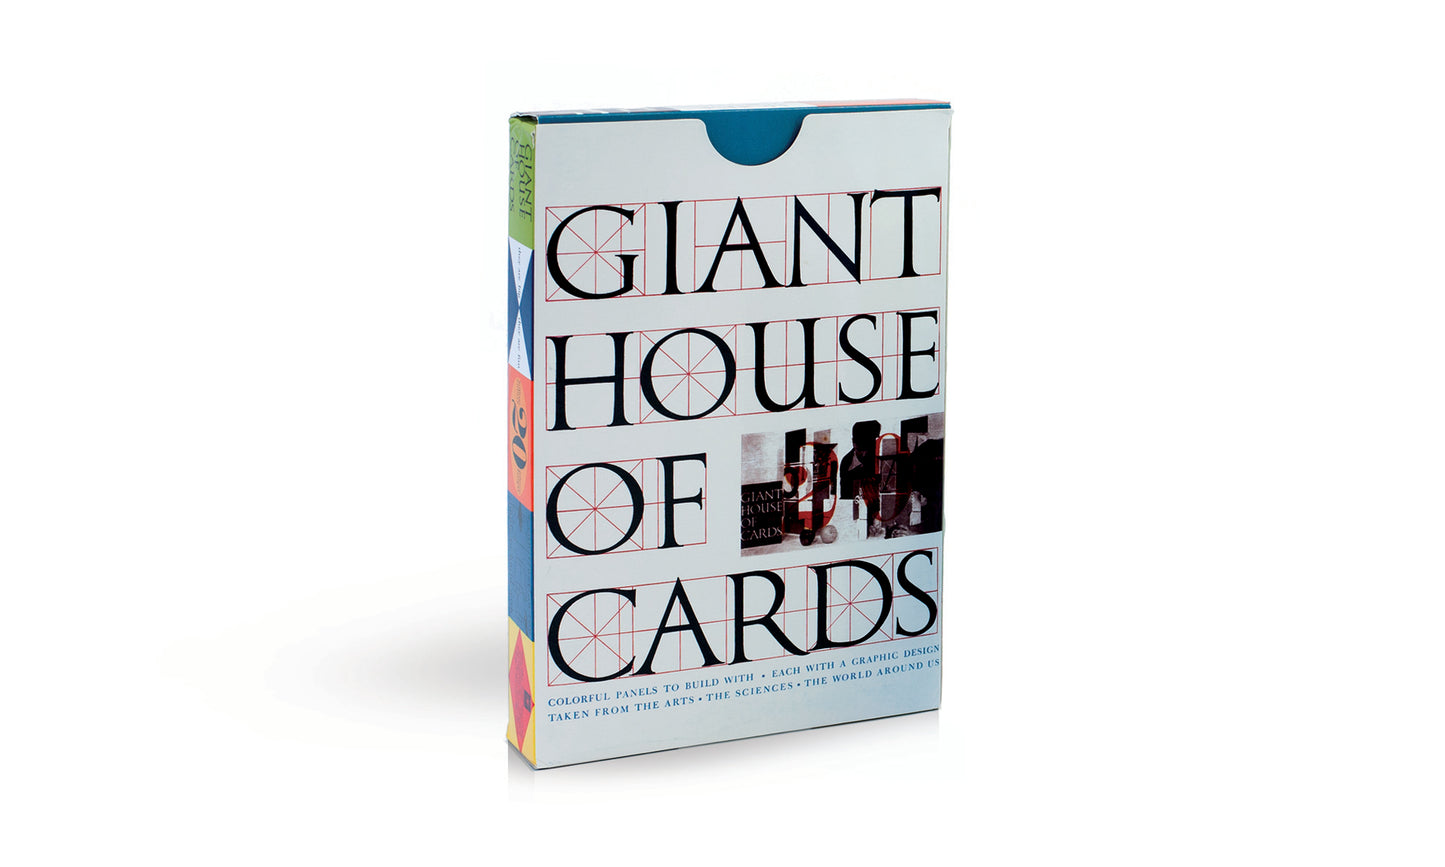 Eames House of Cards - Giant